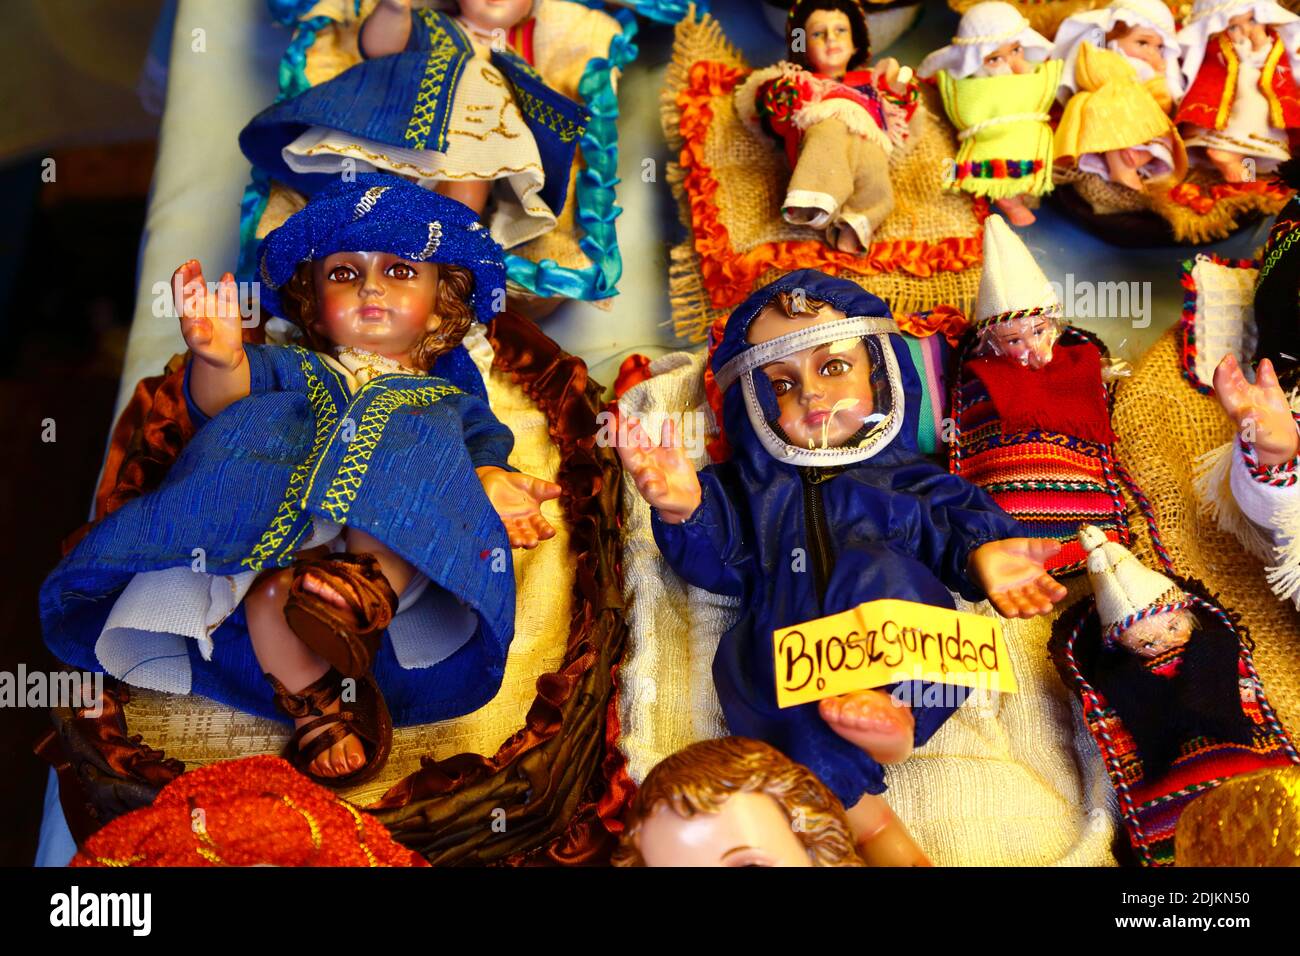 14th December 2020, LA PAZ, BOLIVIA: A baby Jesus figure (called Niño in Spanish) for nativity scenes wearing face mask and protective clothing against the covid 19 coronavirus in a Christmas market. Nativity scenes are a popular and important Christmas decoration in houses and public places in Latin America, and also Spain (where the tradition comes from).  Large numbers of figurines for nativity scenes are sold in Christmas markets; niños wearing protection against the covid 19 coronavirus are a new option this year alongside traditionally dressed niños as a result of the pandemic. Stock Photo